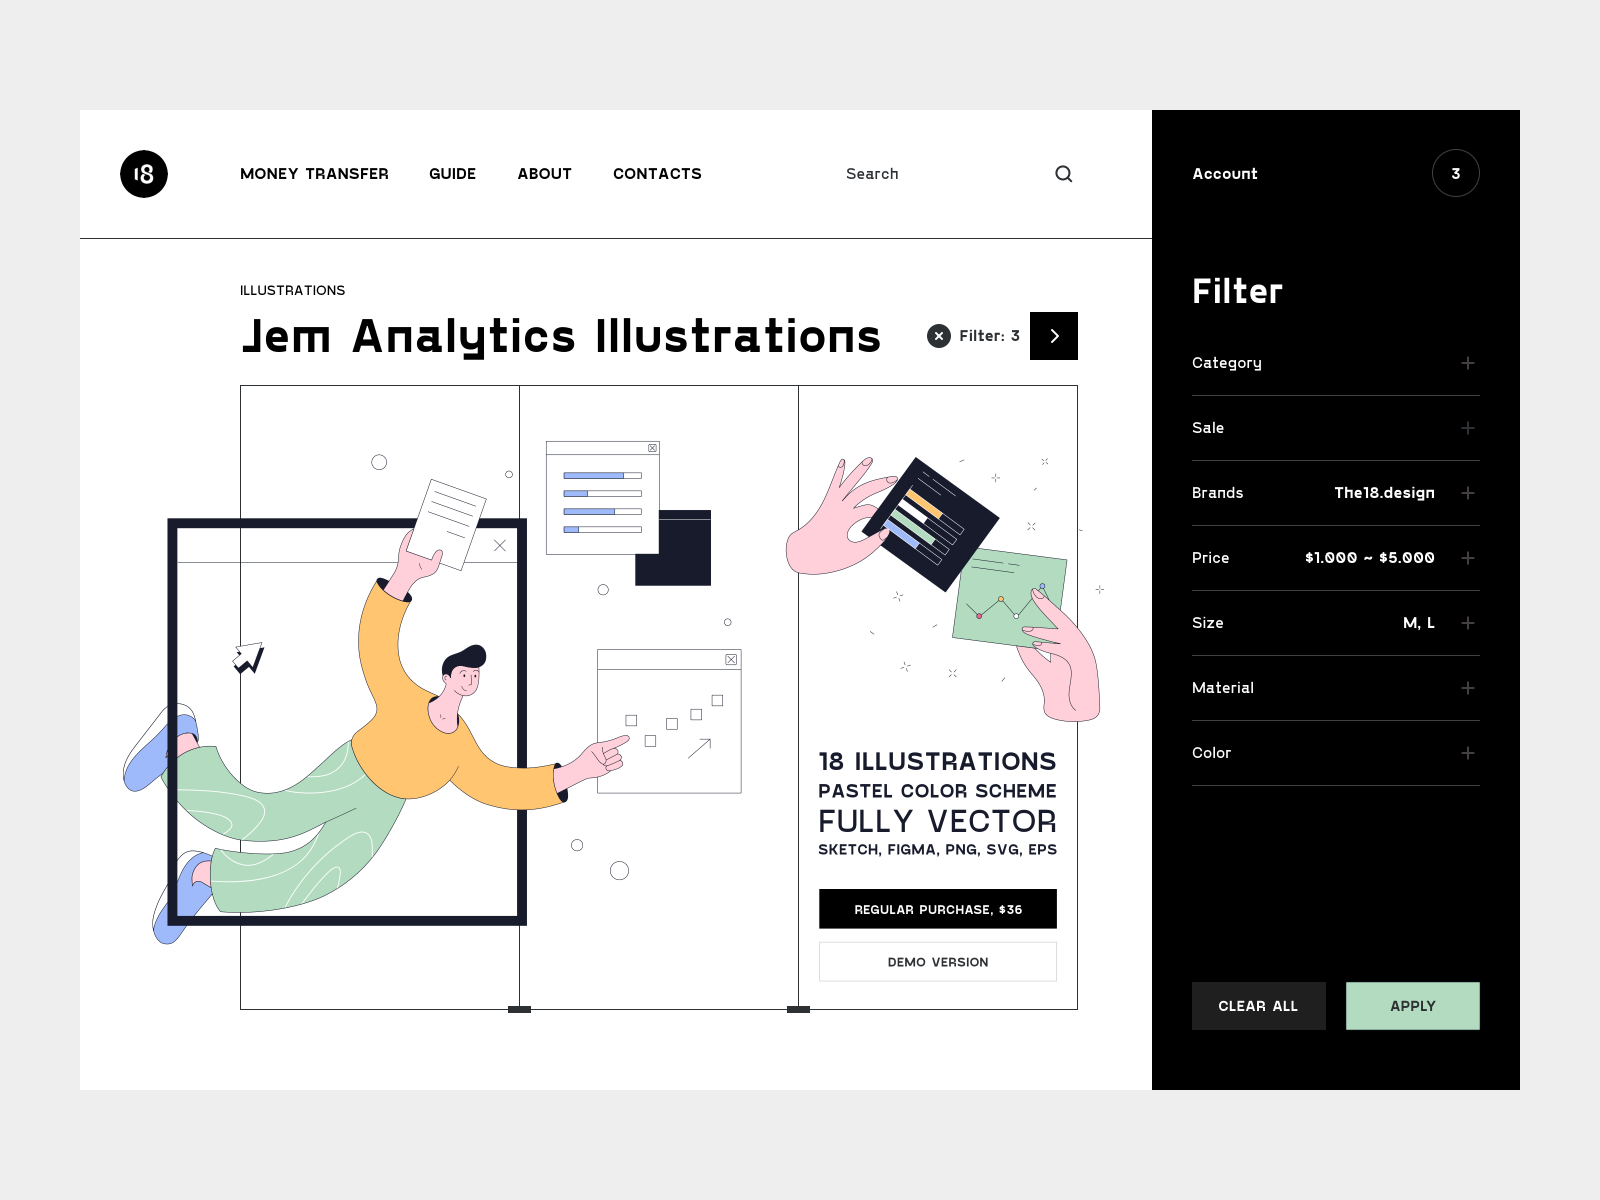 Jem Analytics Illustrations 18design analysis analysis illustration analytics analytics illustration charts clean clean ui converse crm crm illustration illustration minimalism trend trend 2022 trendy ui uidesign website website illustration